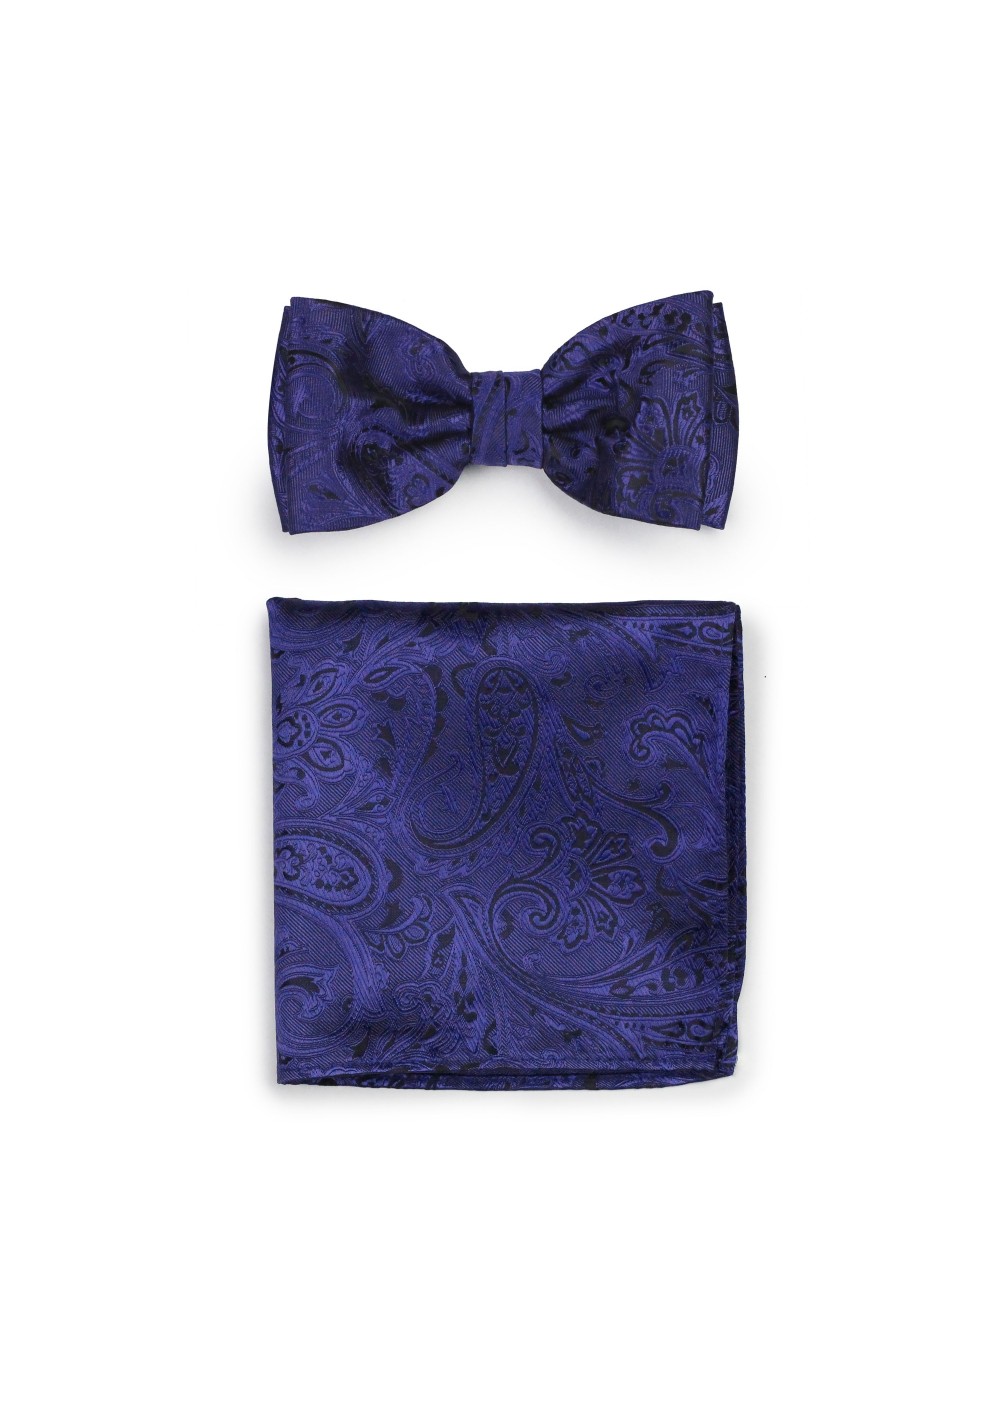 Formal Paisley Bow Tie and Pocket Square Hanky Set in Ultramarine